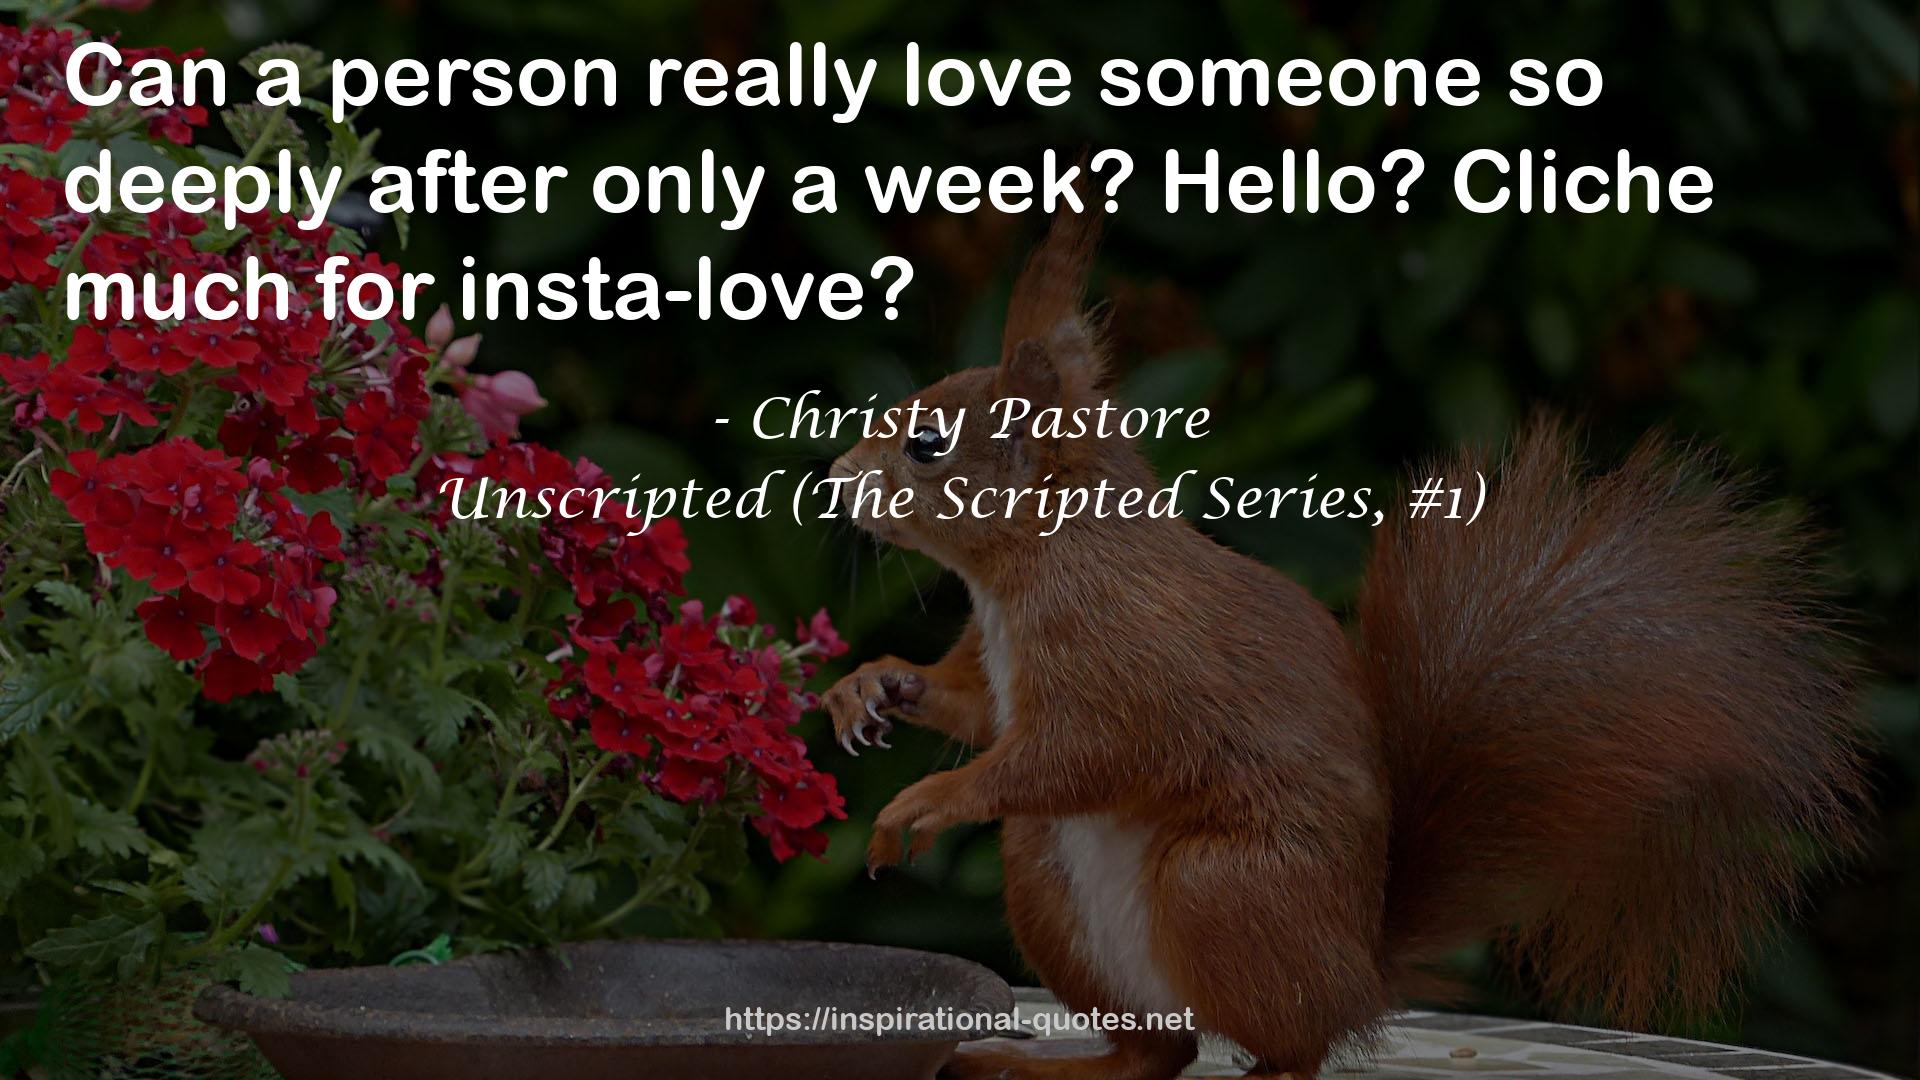 Unscripted (The Scripted Series, #1) QUOTES